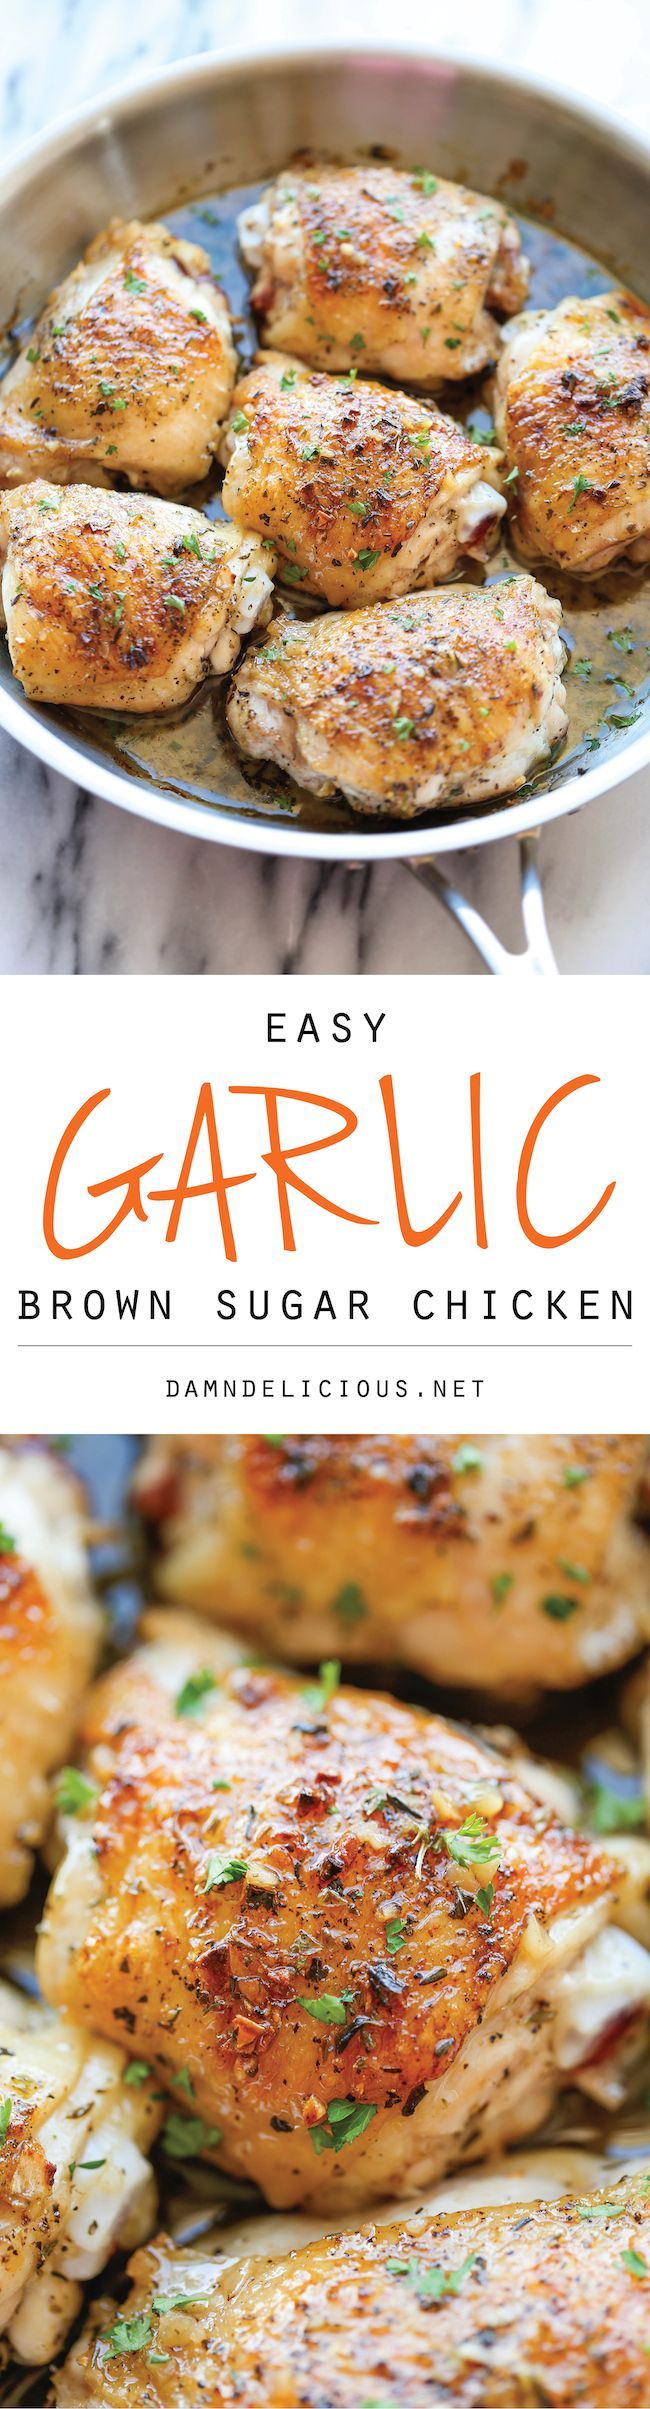 Garlic Brown Sugar Chicken – The best and easiest chicken ever, baked to crisp-tender perfection along wit